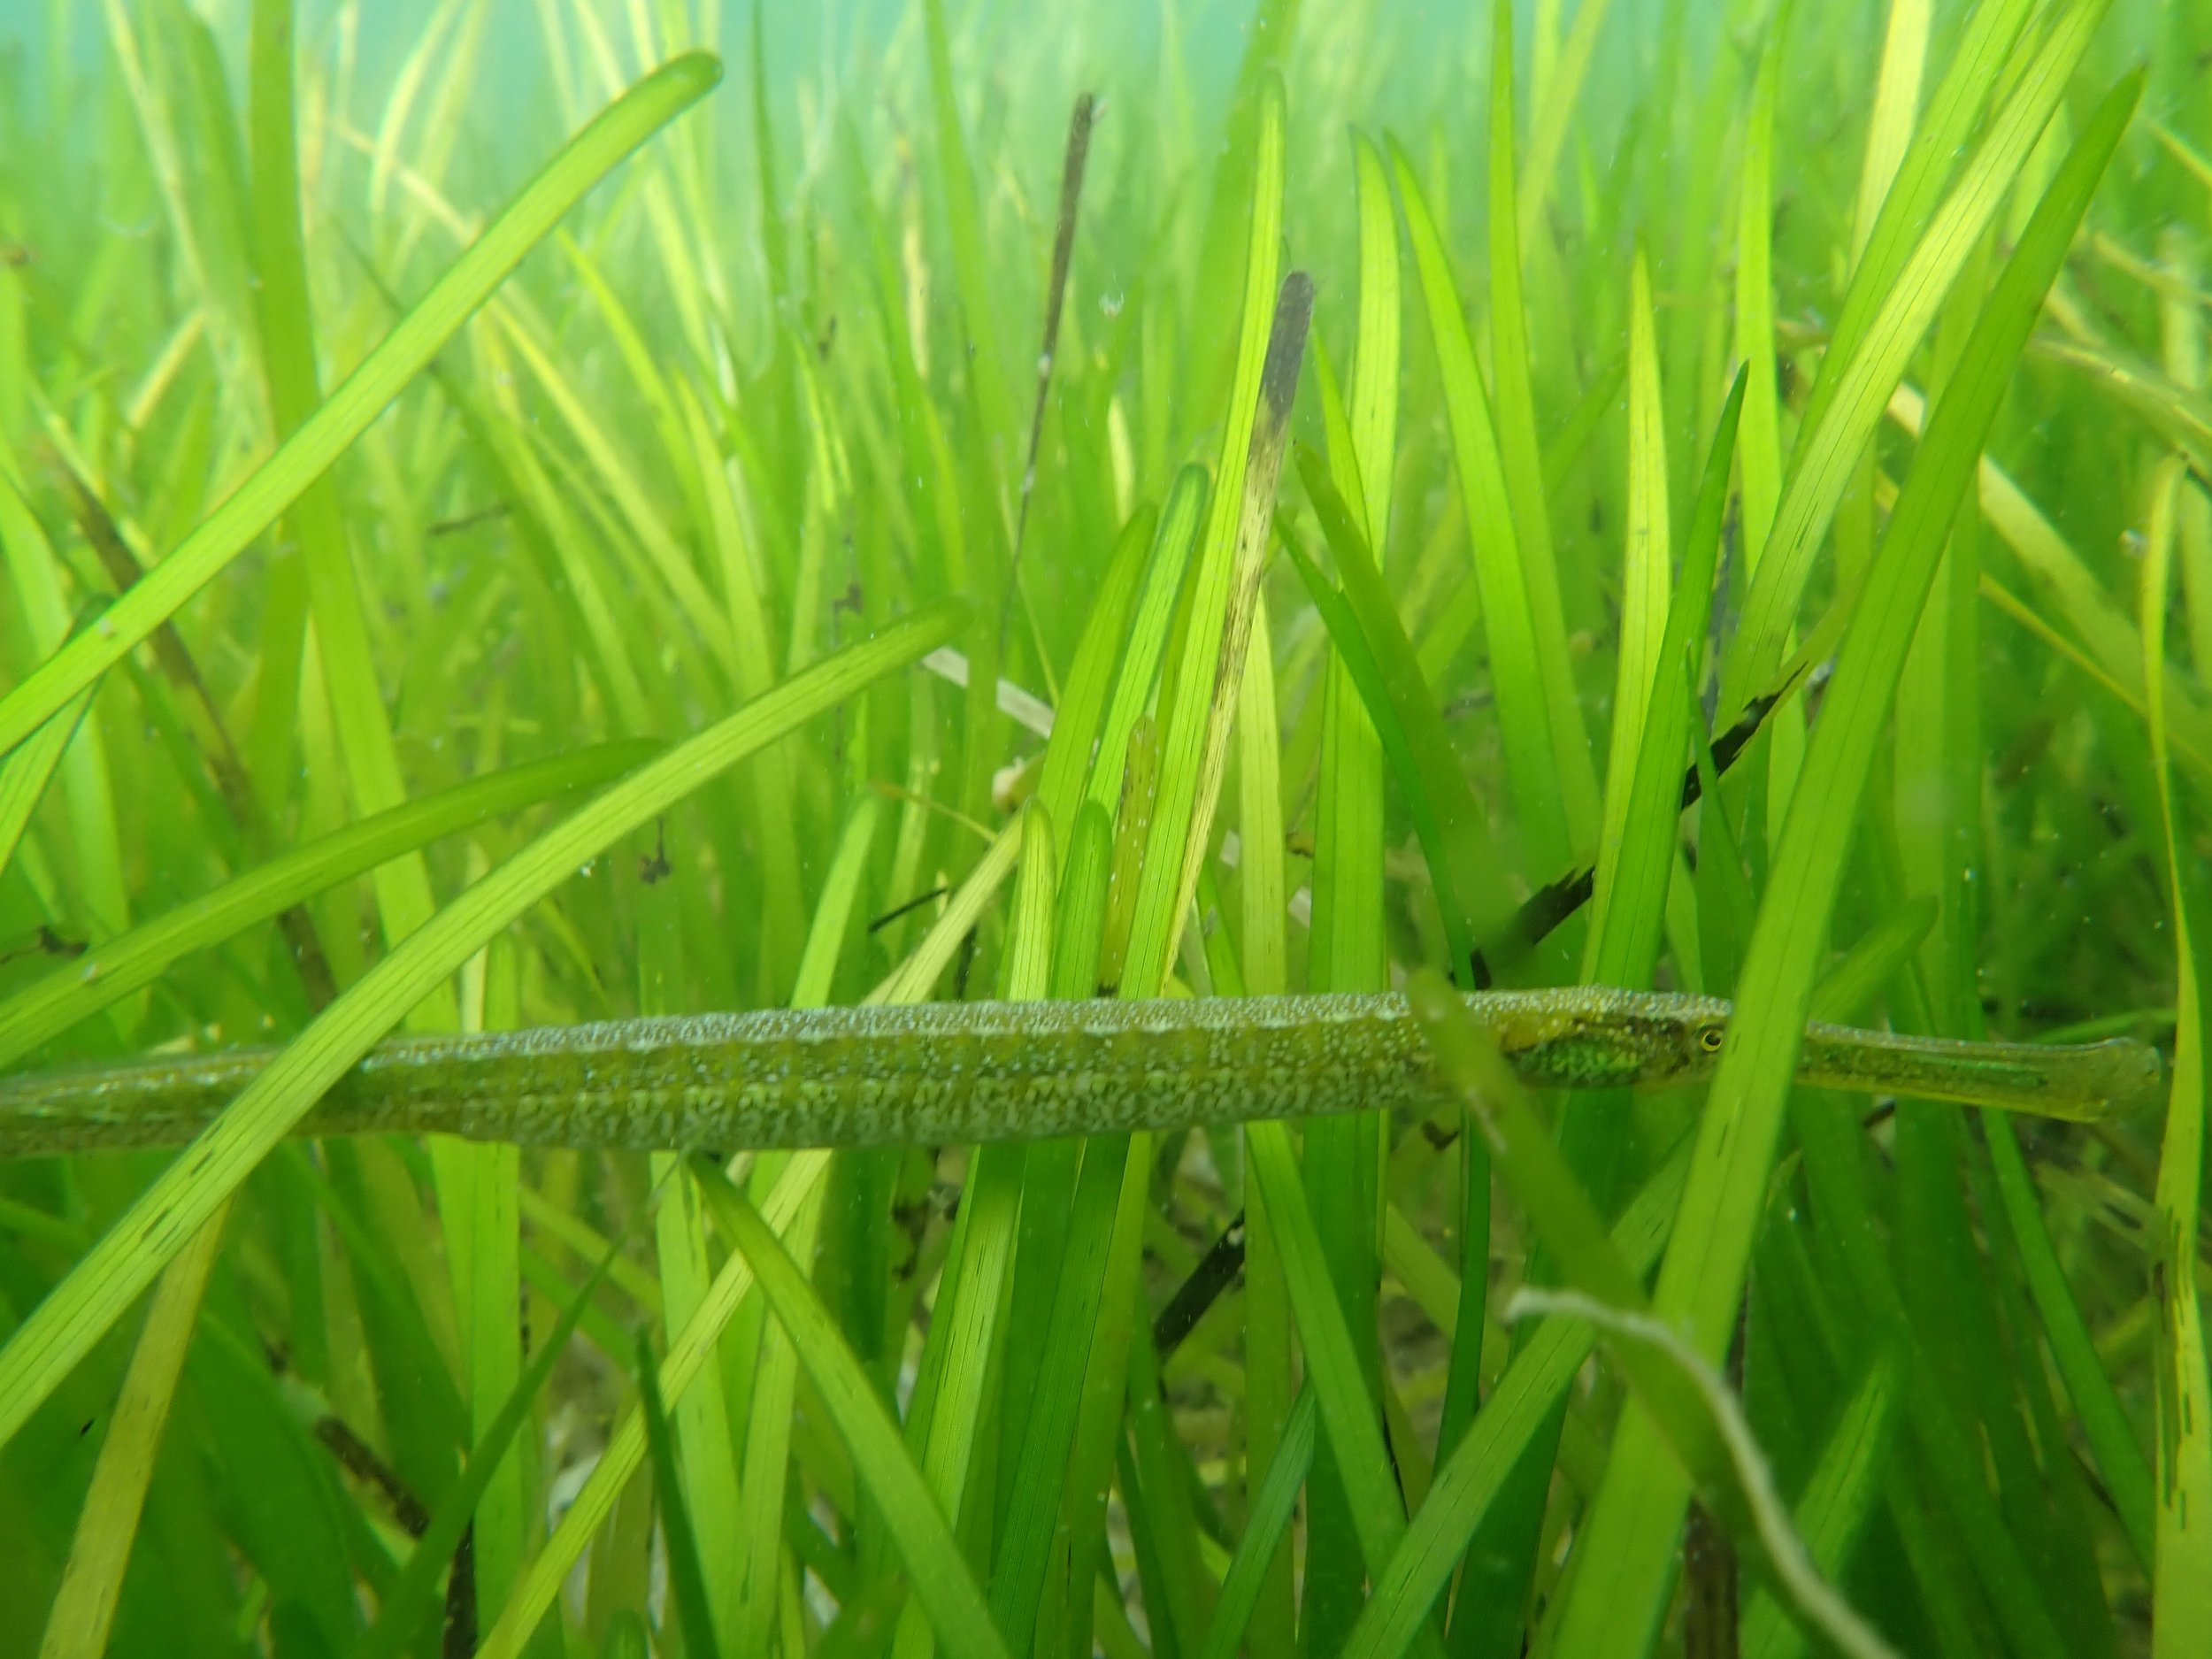  Pipe fish swimming in a seagrass meadow. Photo by Lyle Boyle.  